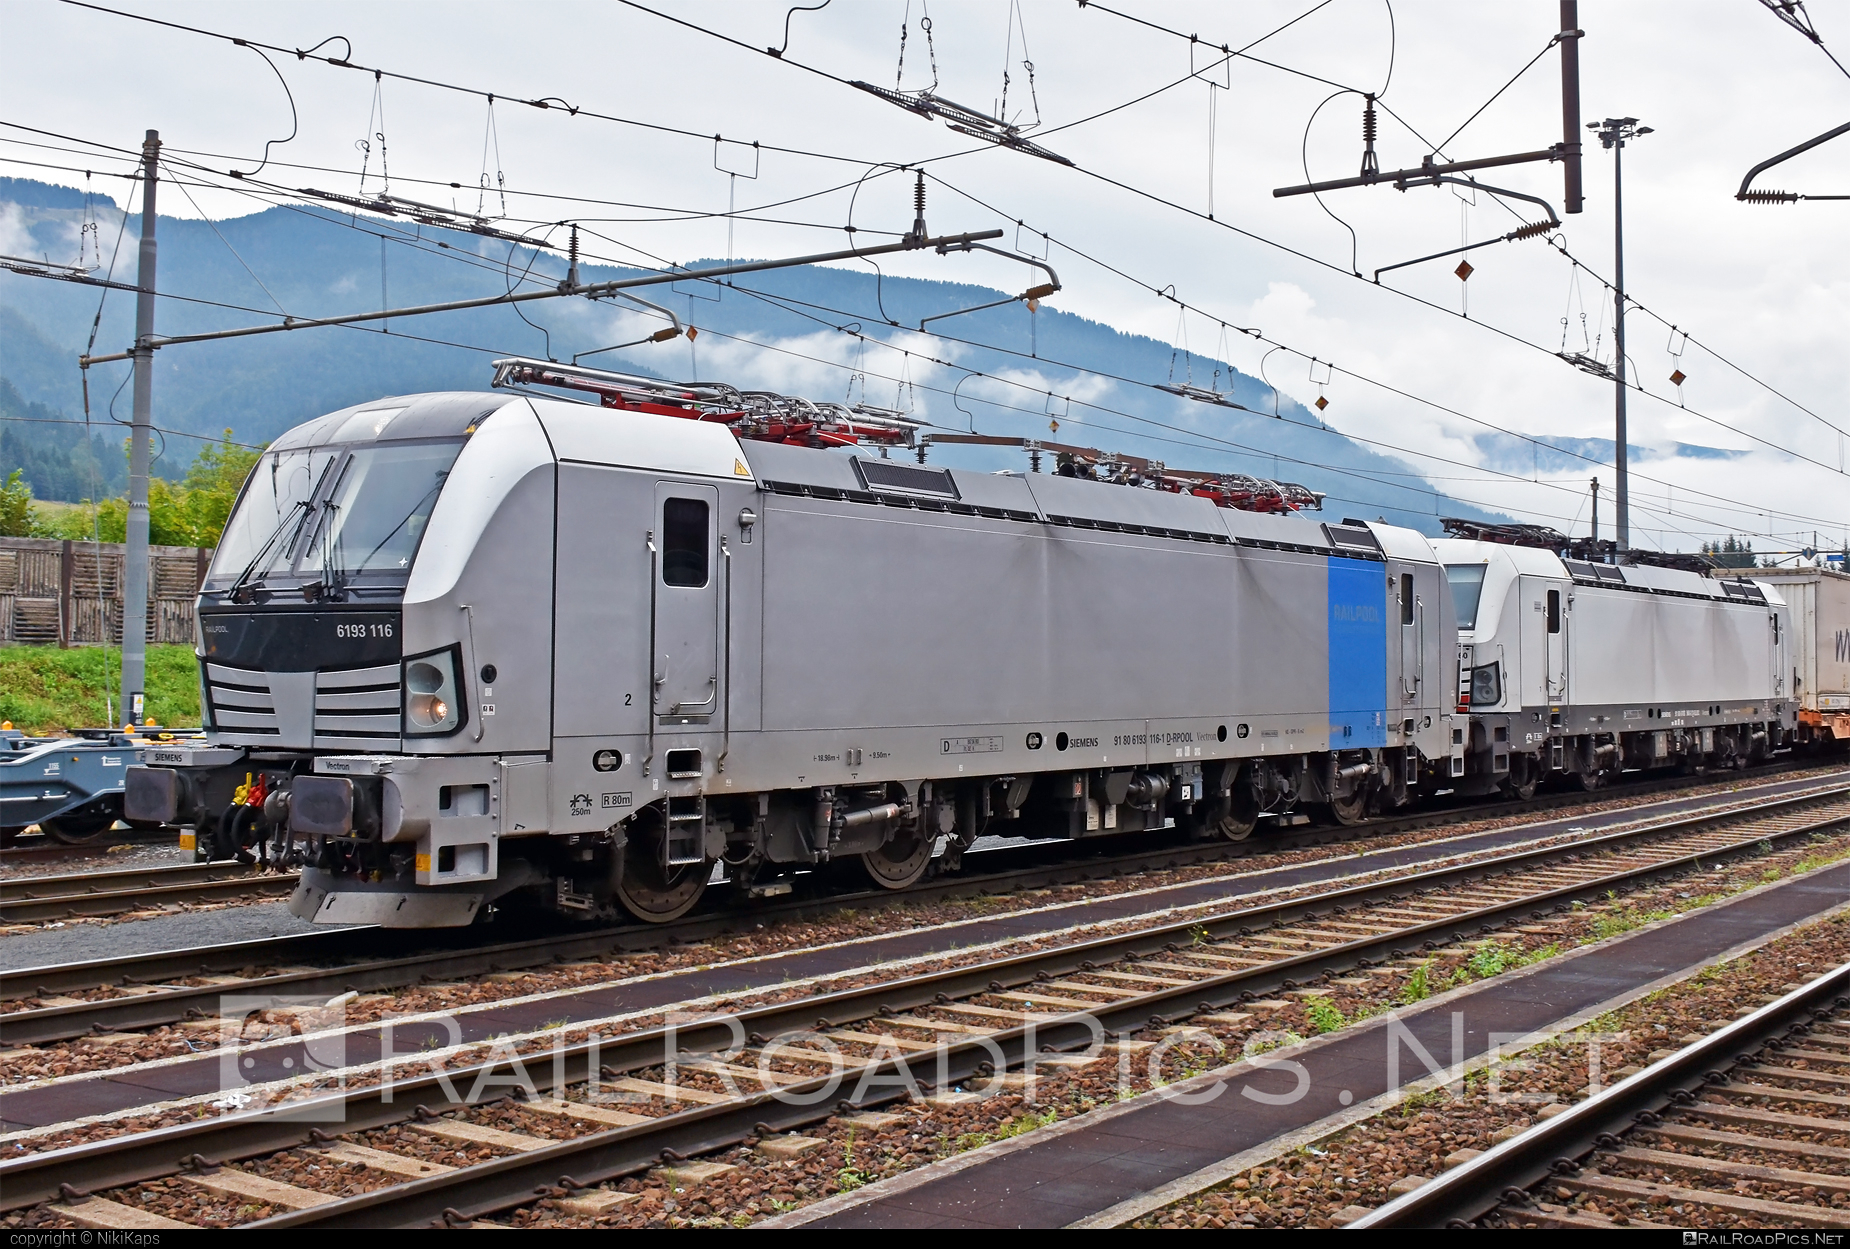 Siemens Vectron MS - 6193 116 operated by ecco-rail GmbH #eccorail #eccorailgmbh #ekol #railpool #railpoolgmbh #siemens #siemensVectron #siemensVectronMS #vectron #vectronMS